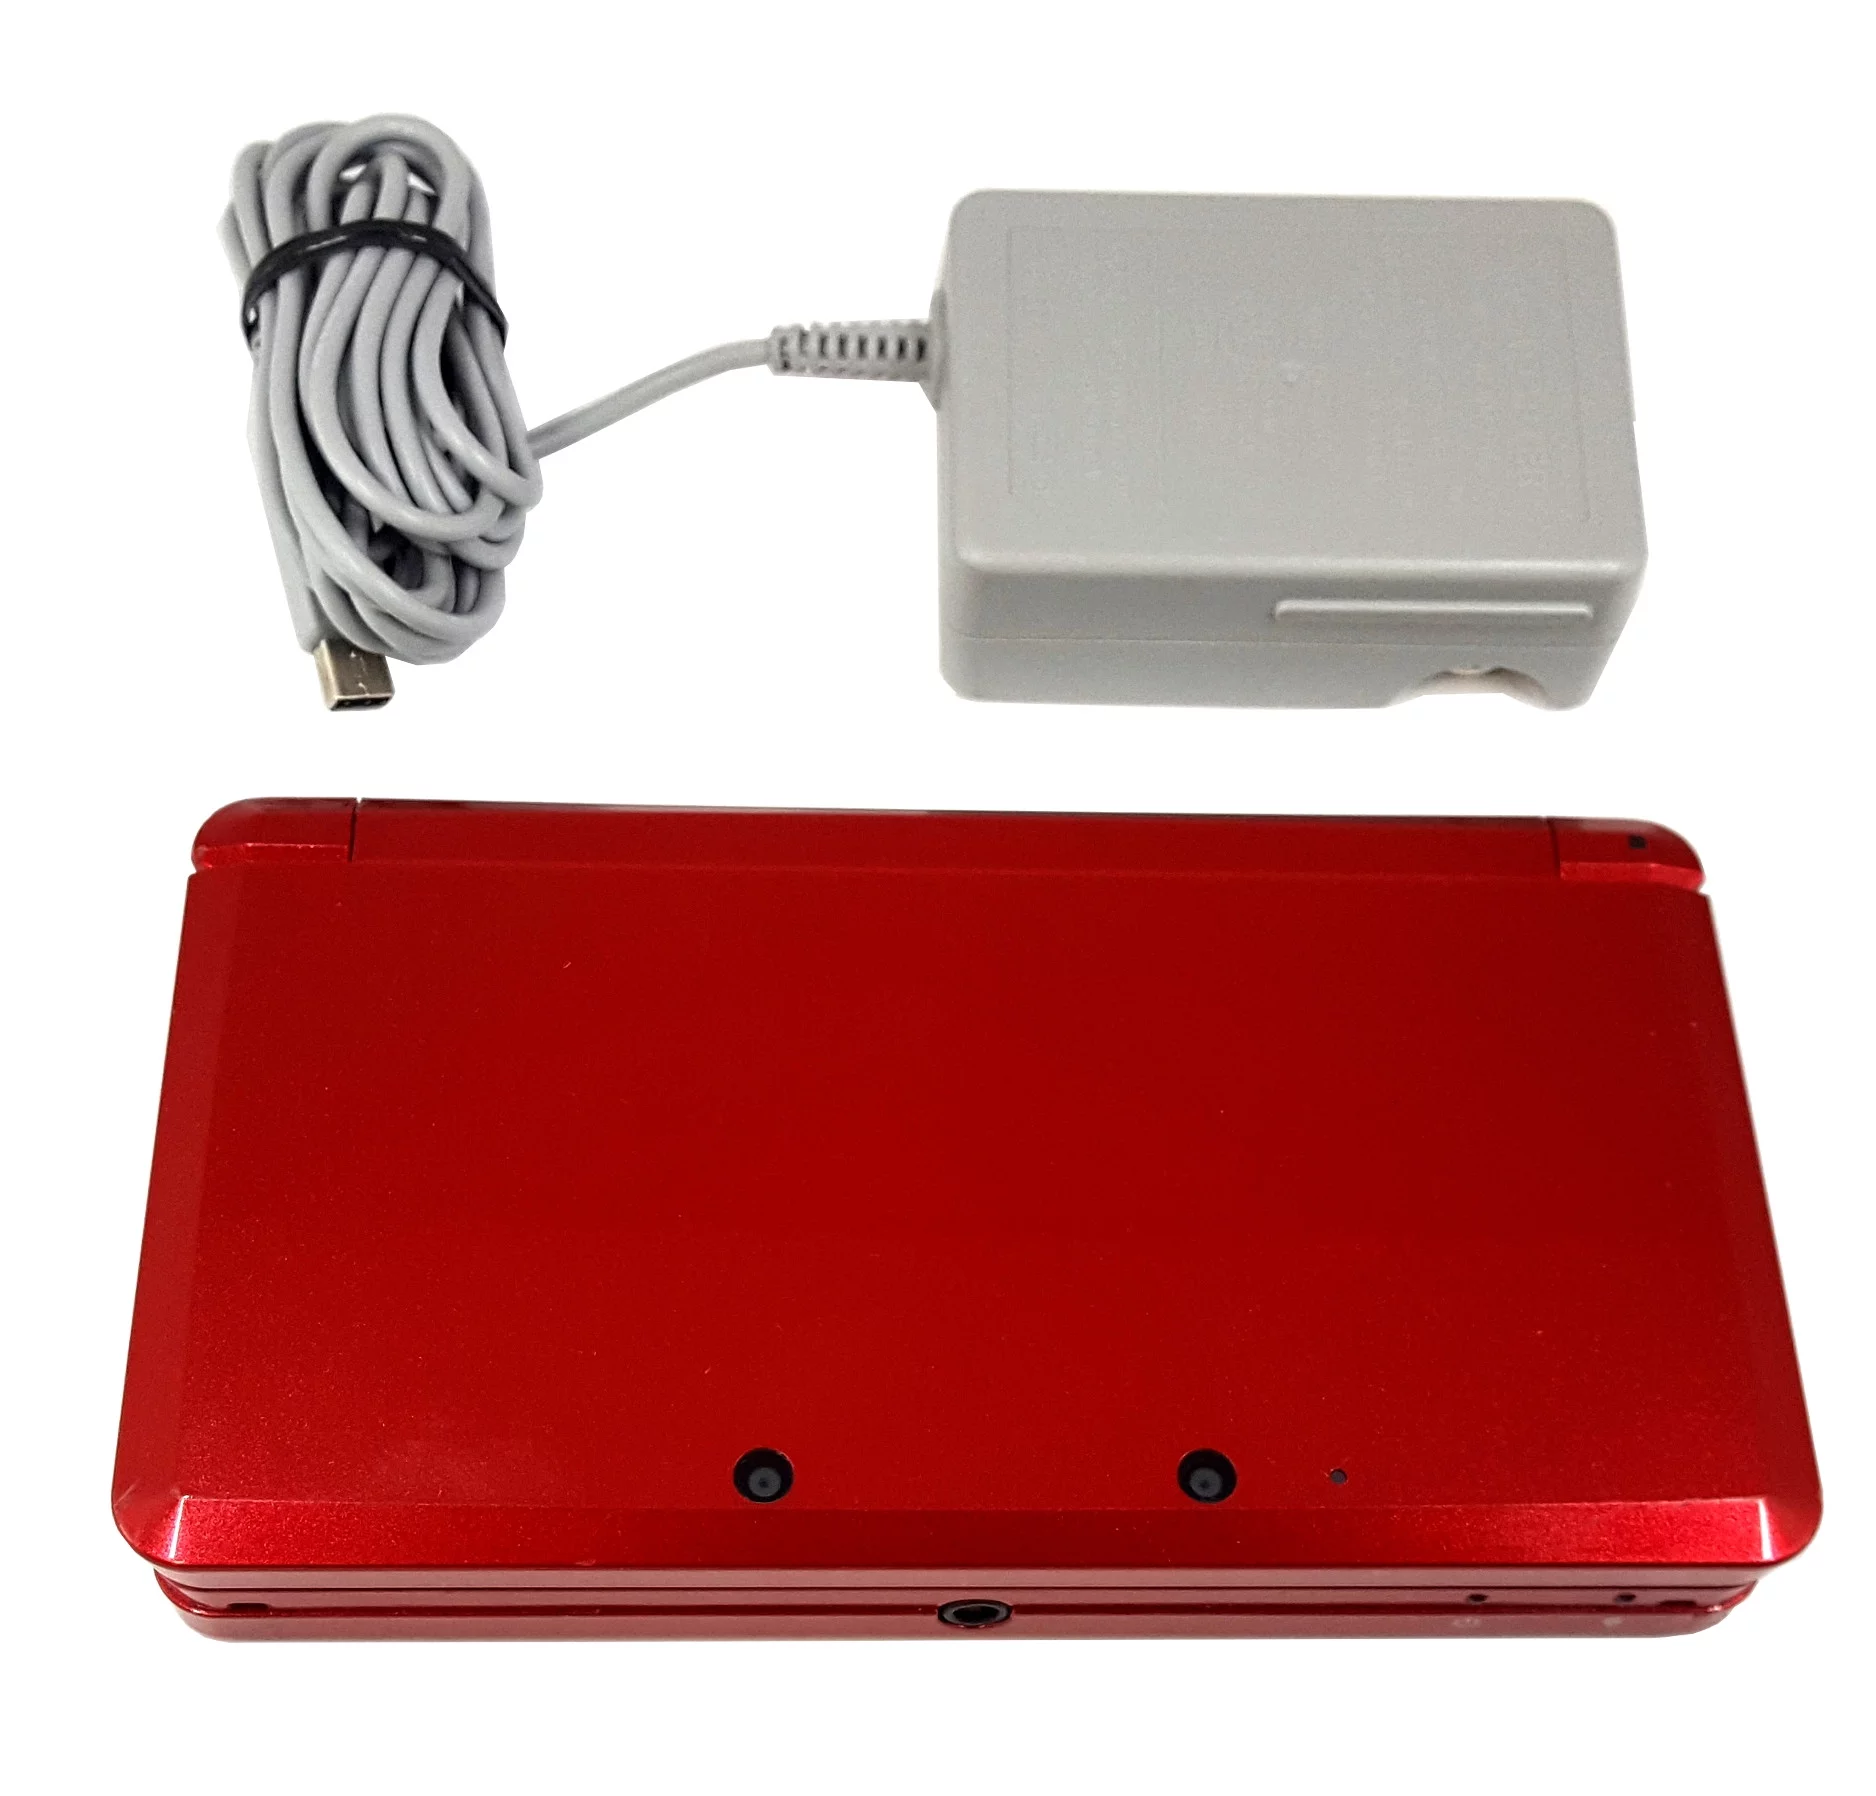 Refurbished Nintendo 3DS Flame Red Super Mario 3D Land Bundle with Stylus SD Card Charger